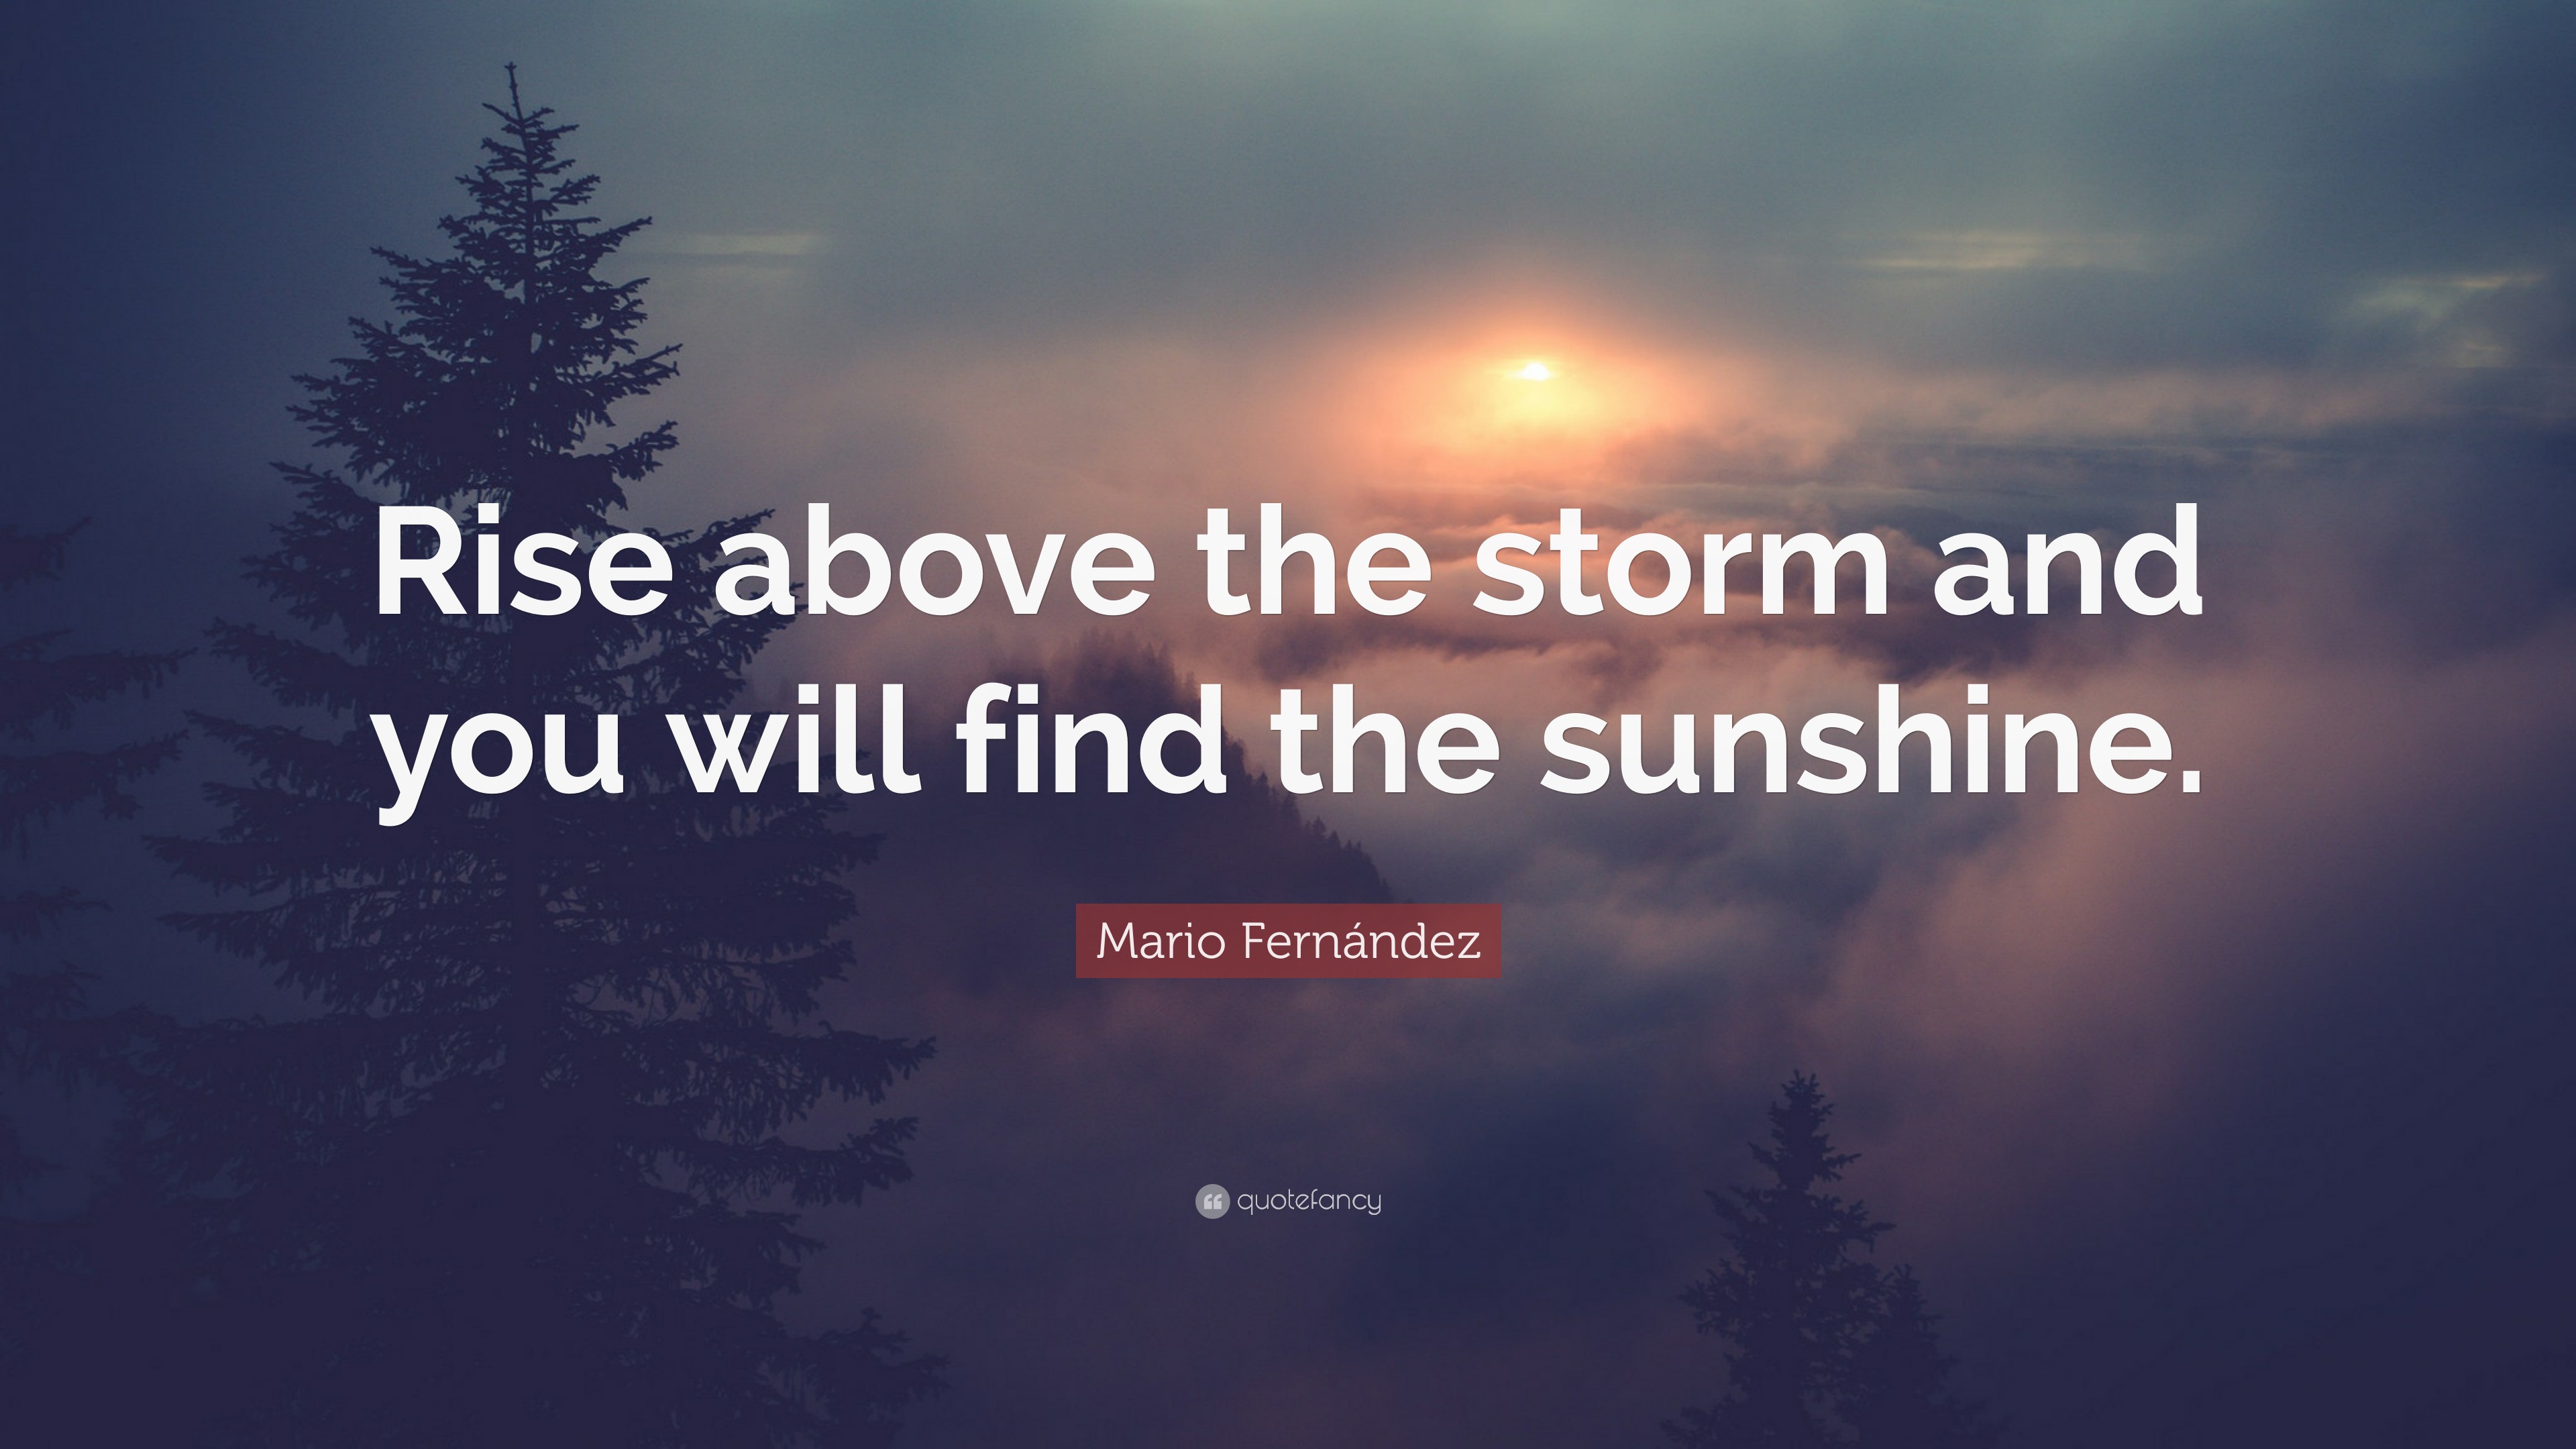 Rise above the storm and you will find the sunshine